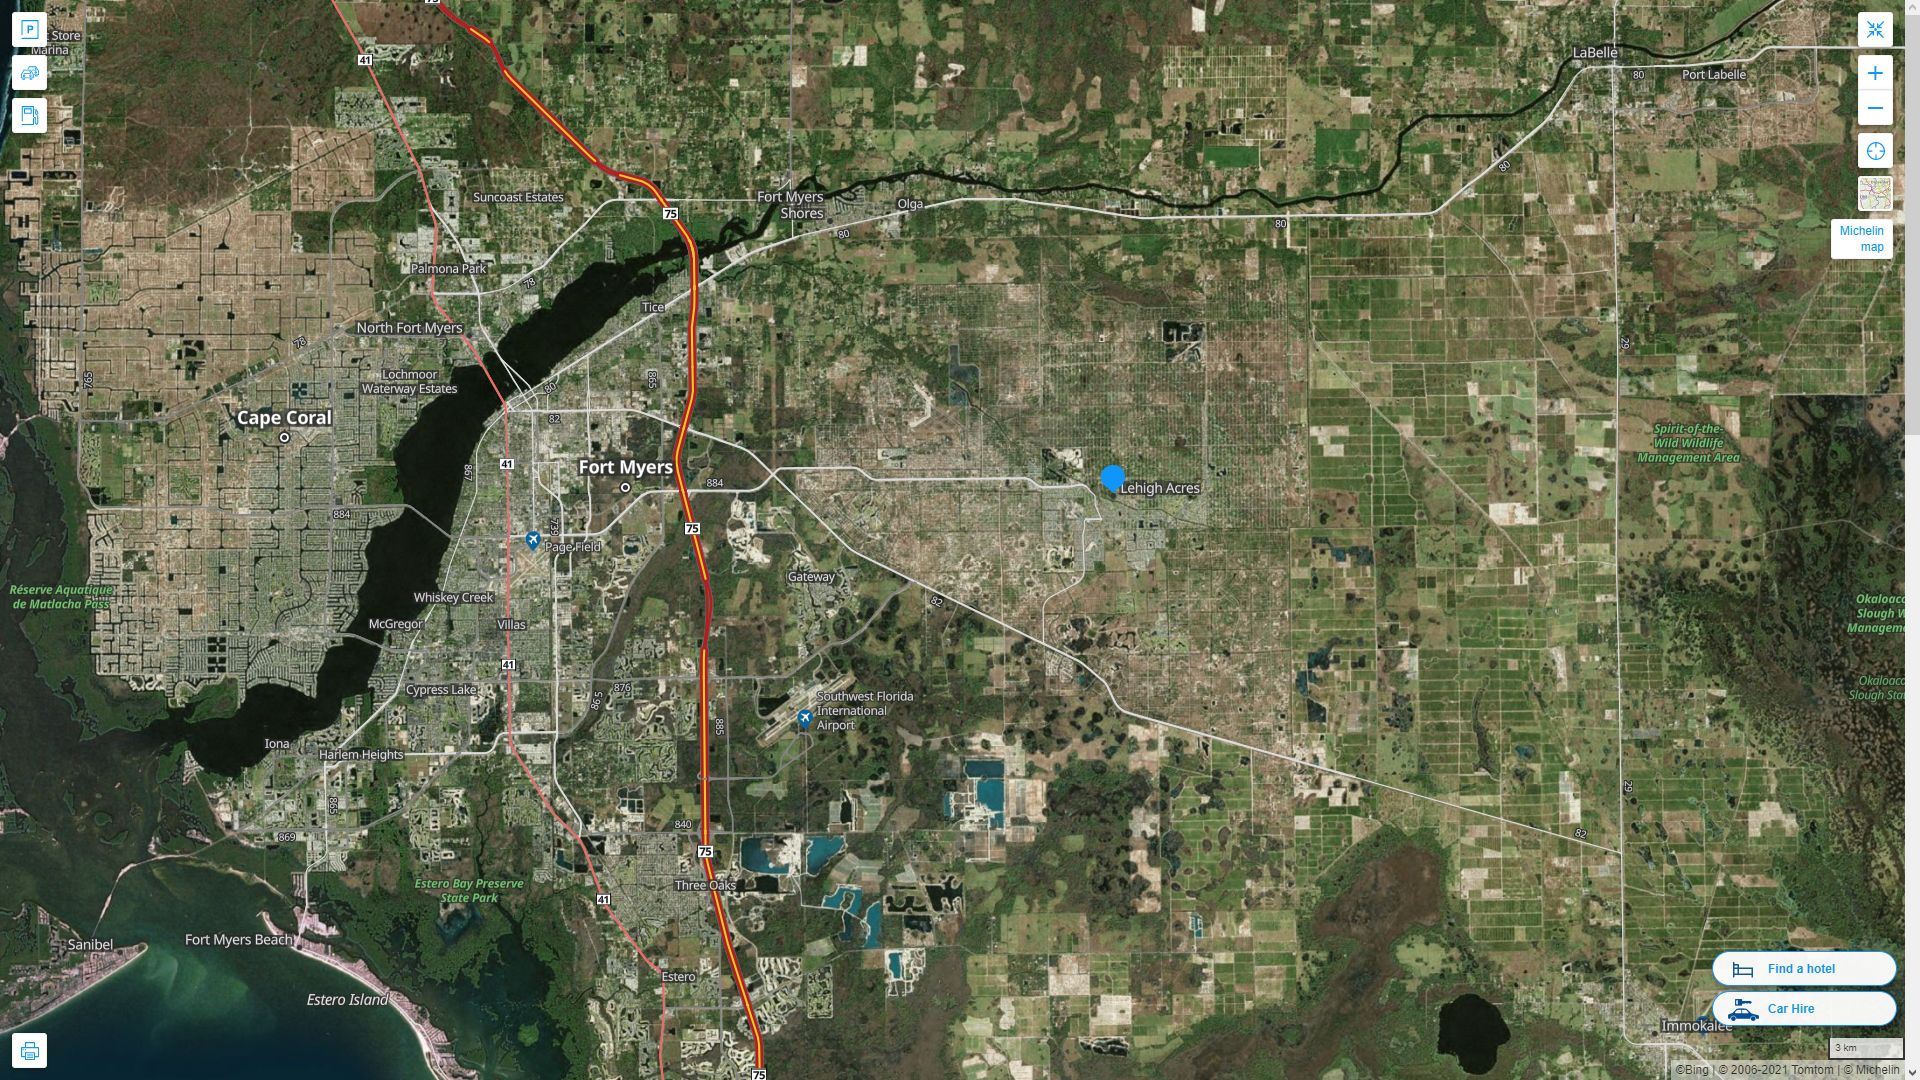 Lehigh Acres Florida Highway and Road Map with Satellite View